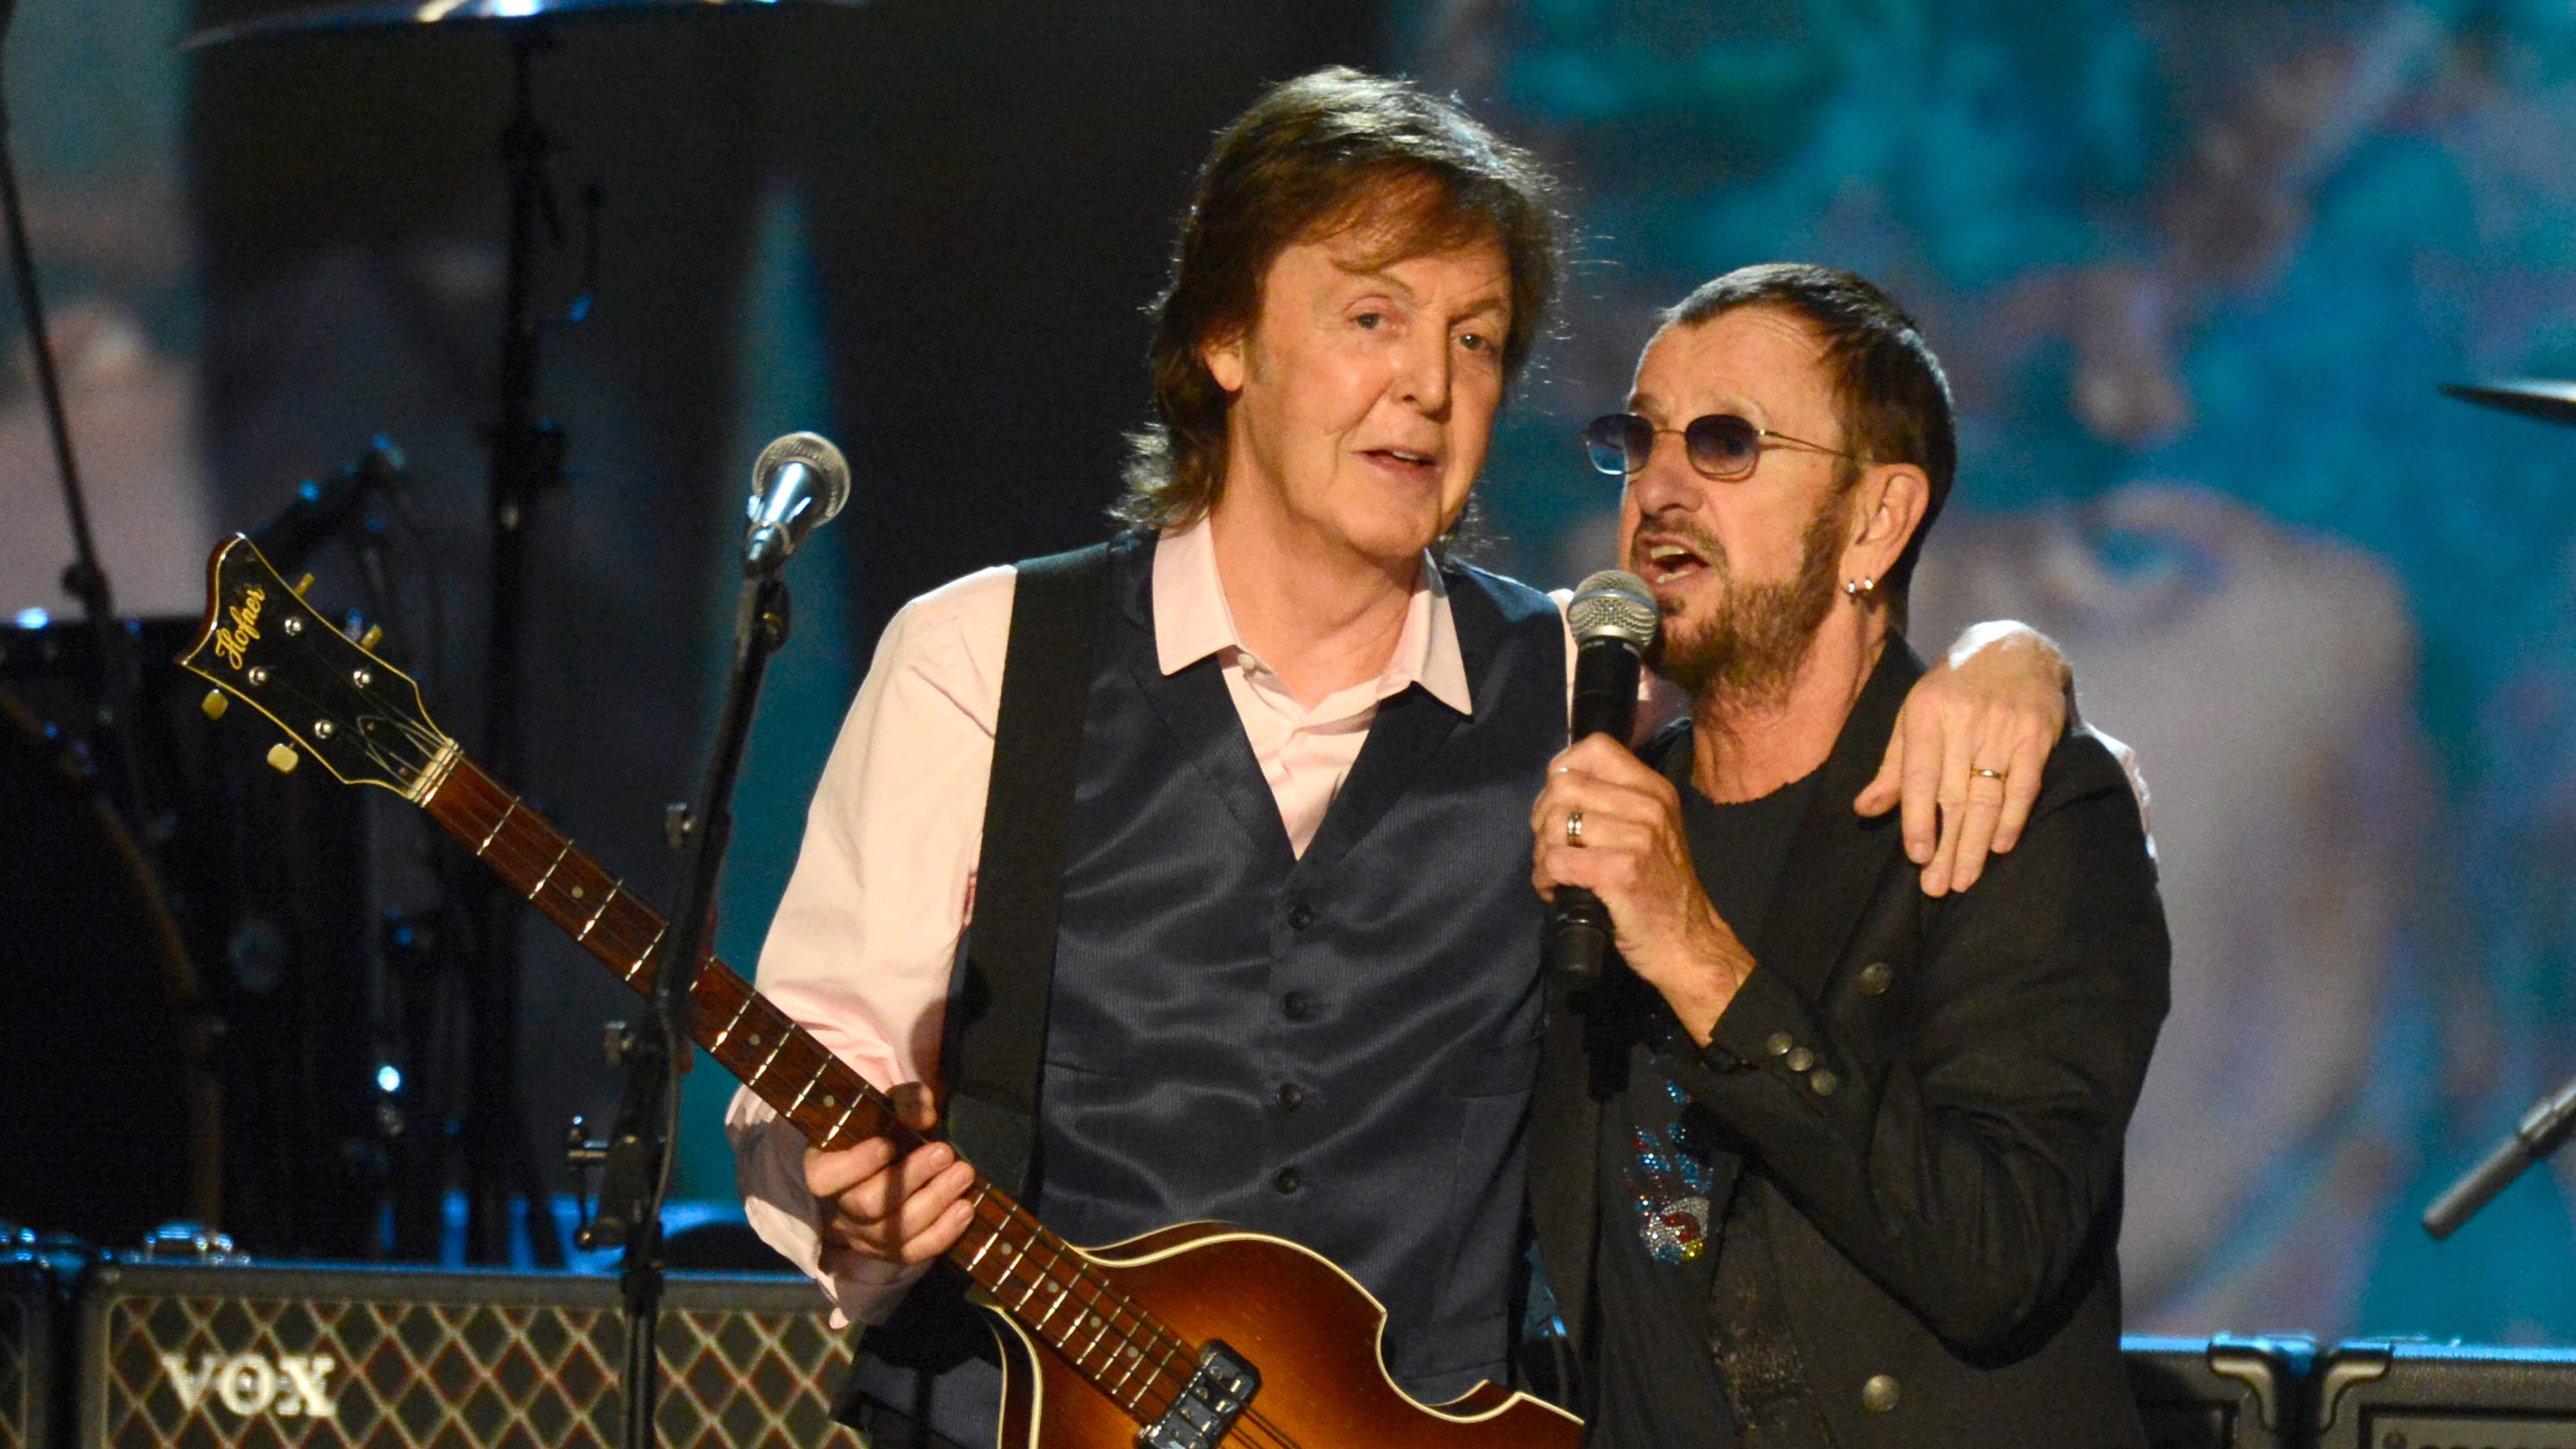 Paul McCartney brings out Ringo Starr for tourclosing Beatles reunion